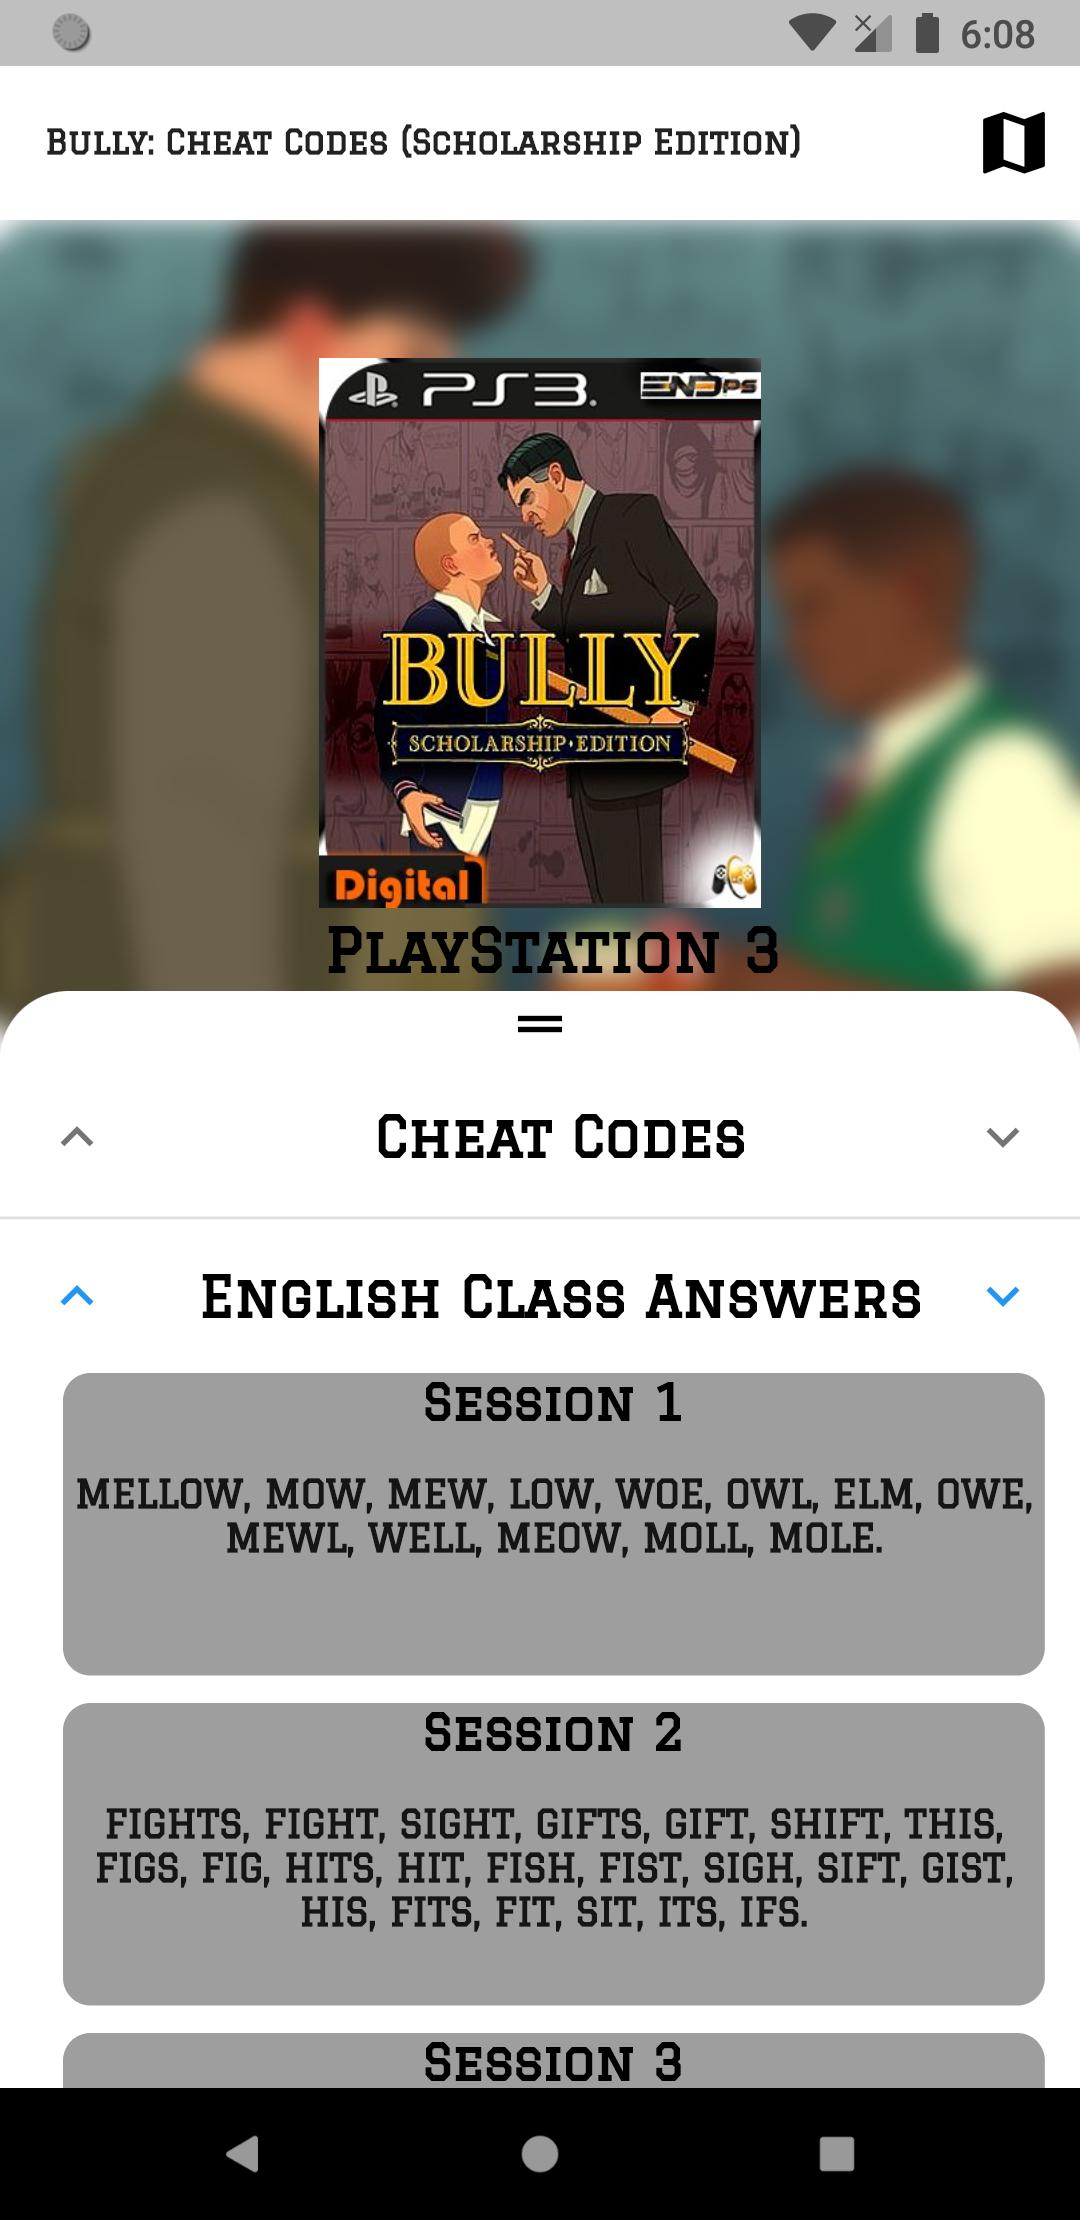 Bully: Cheat Codes - Scholarship Edition APK voor Android Download